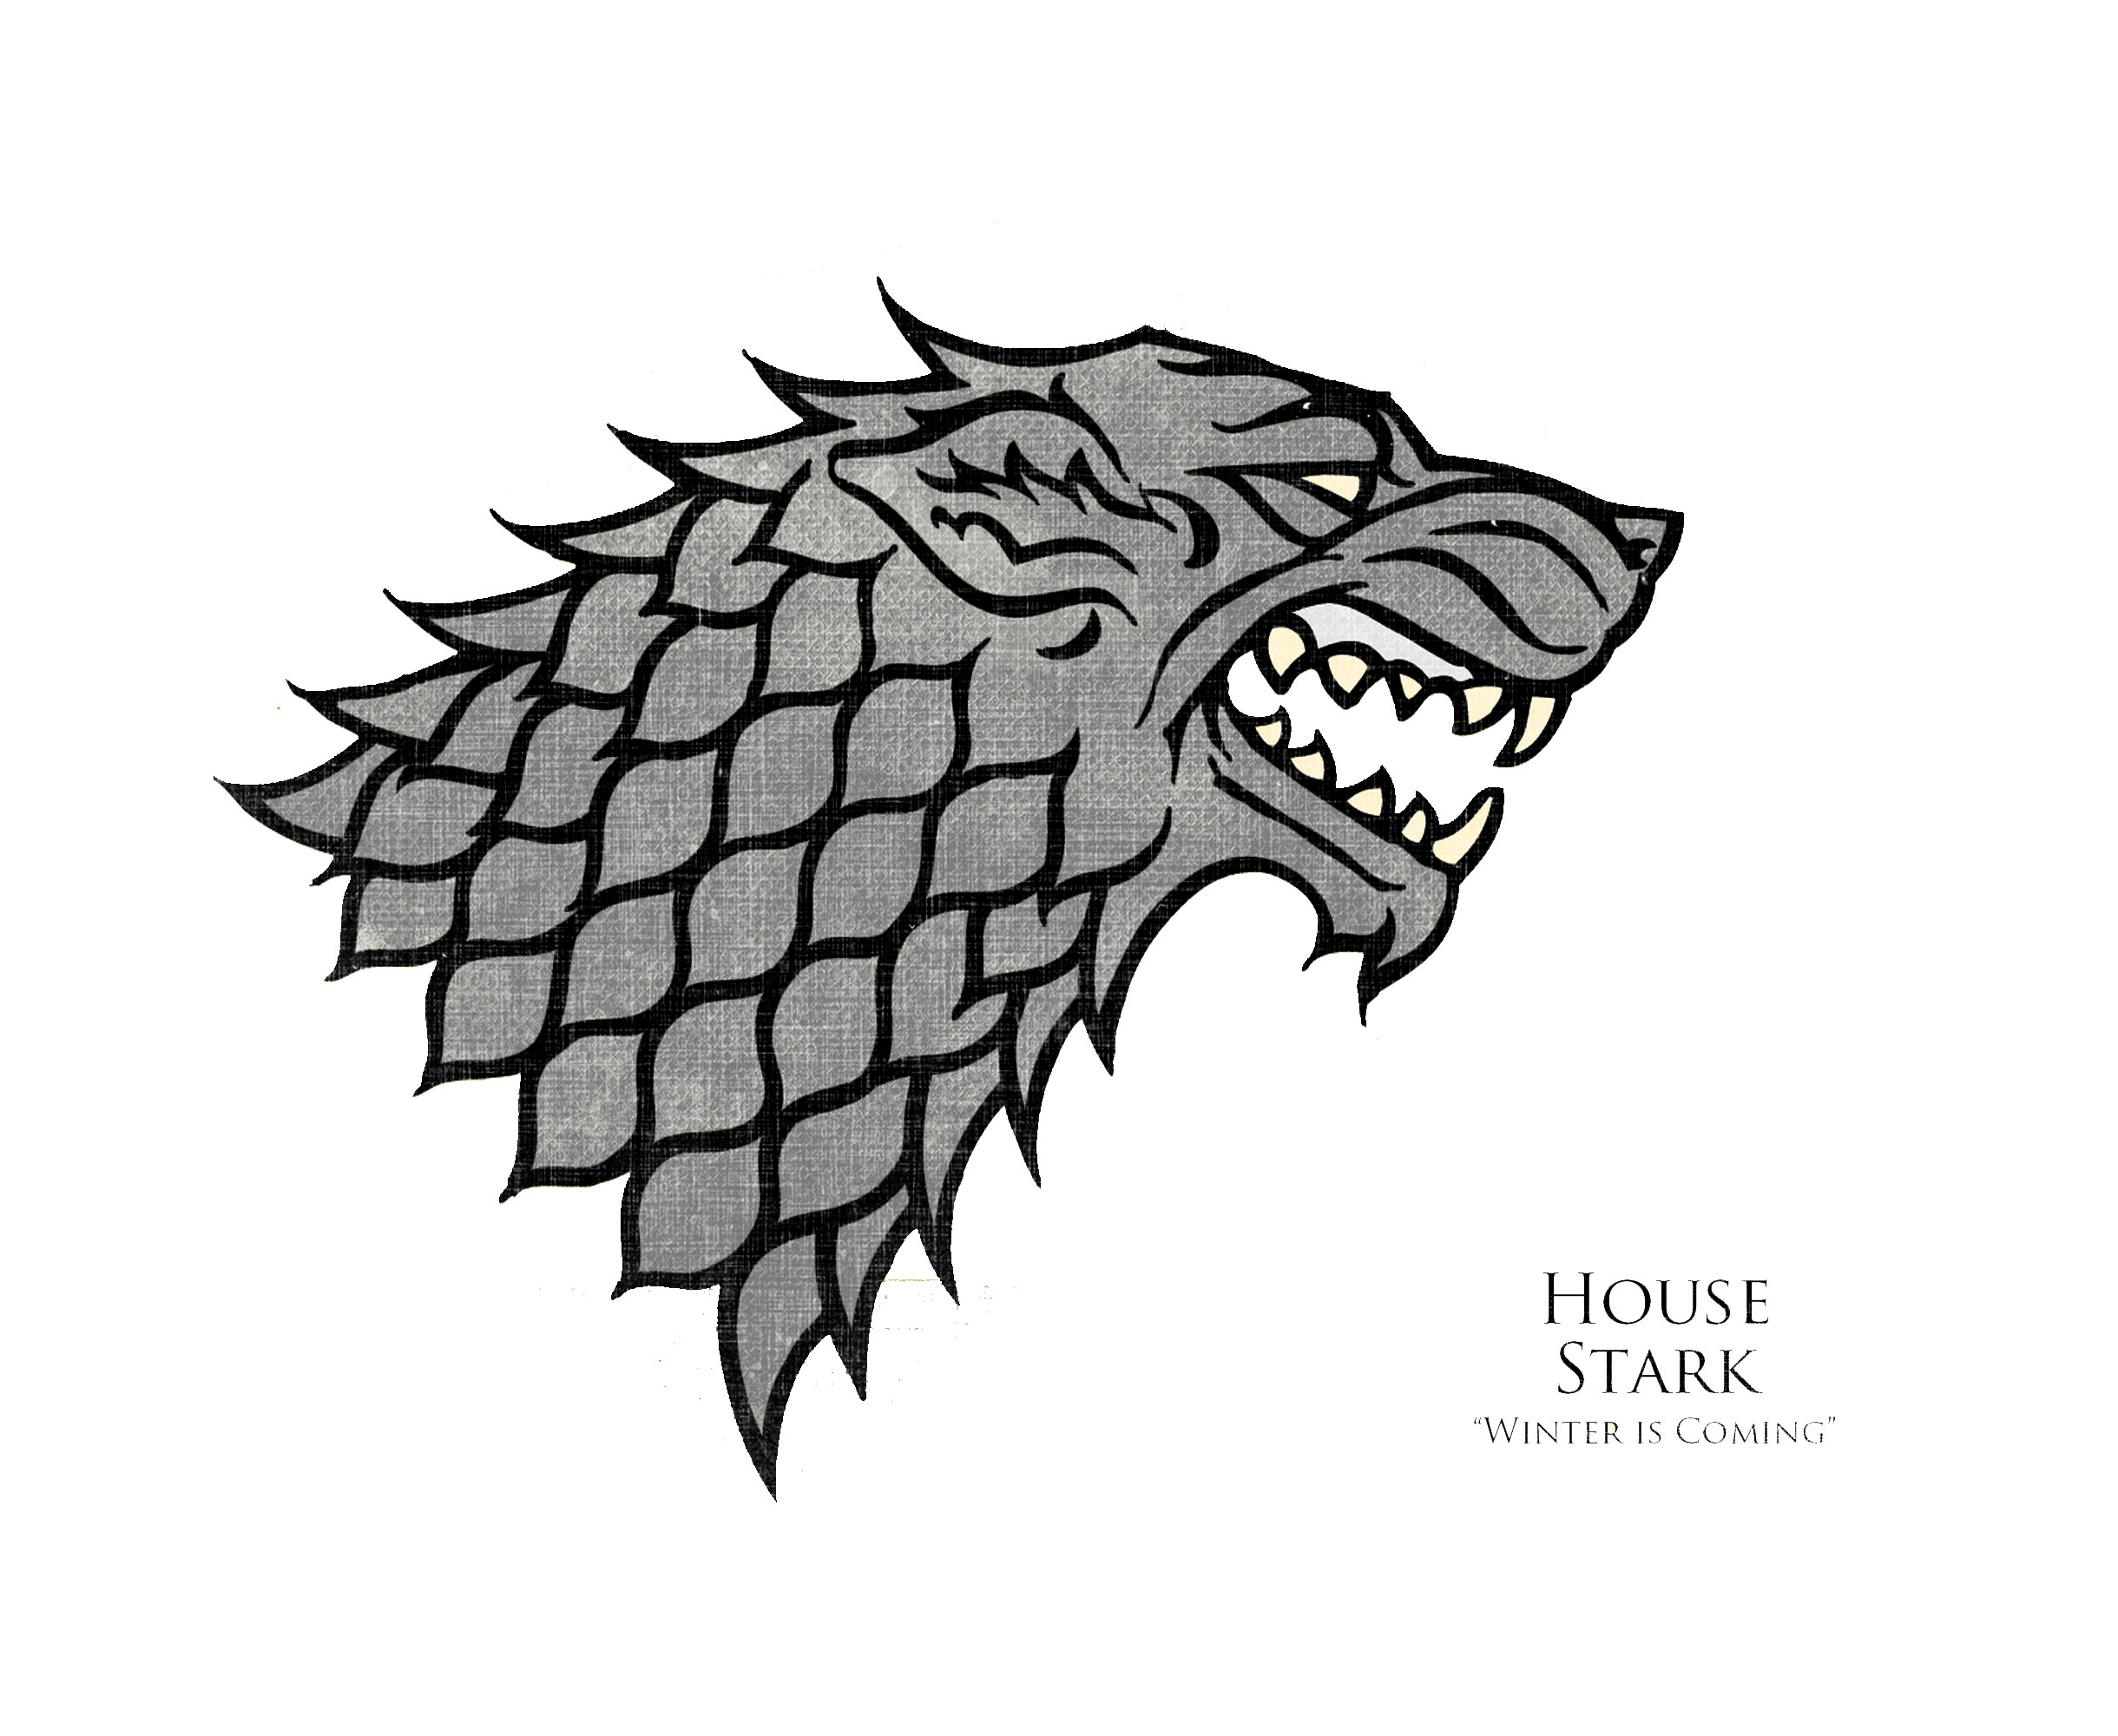 Game Of Thrones Transparent PNG Image